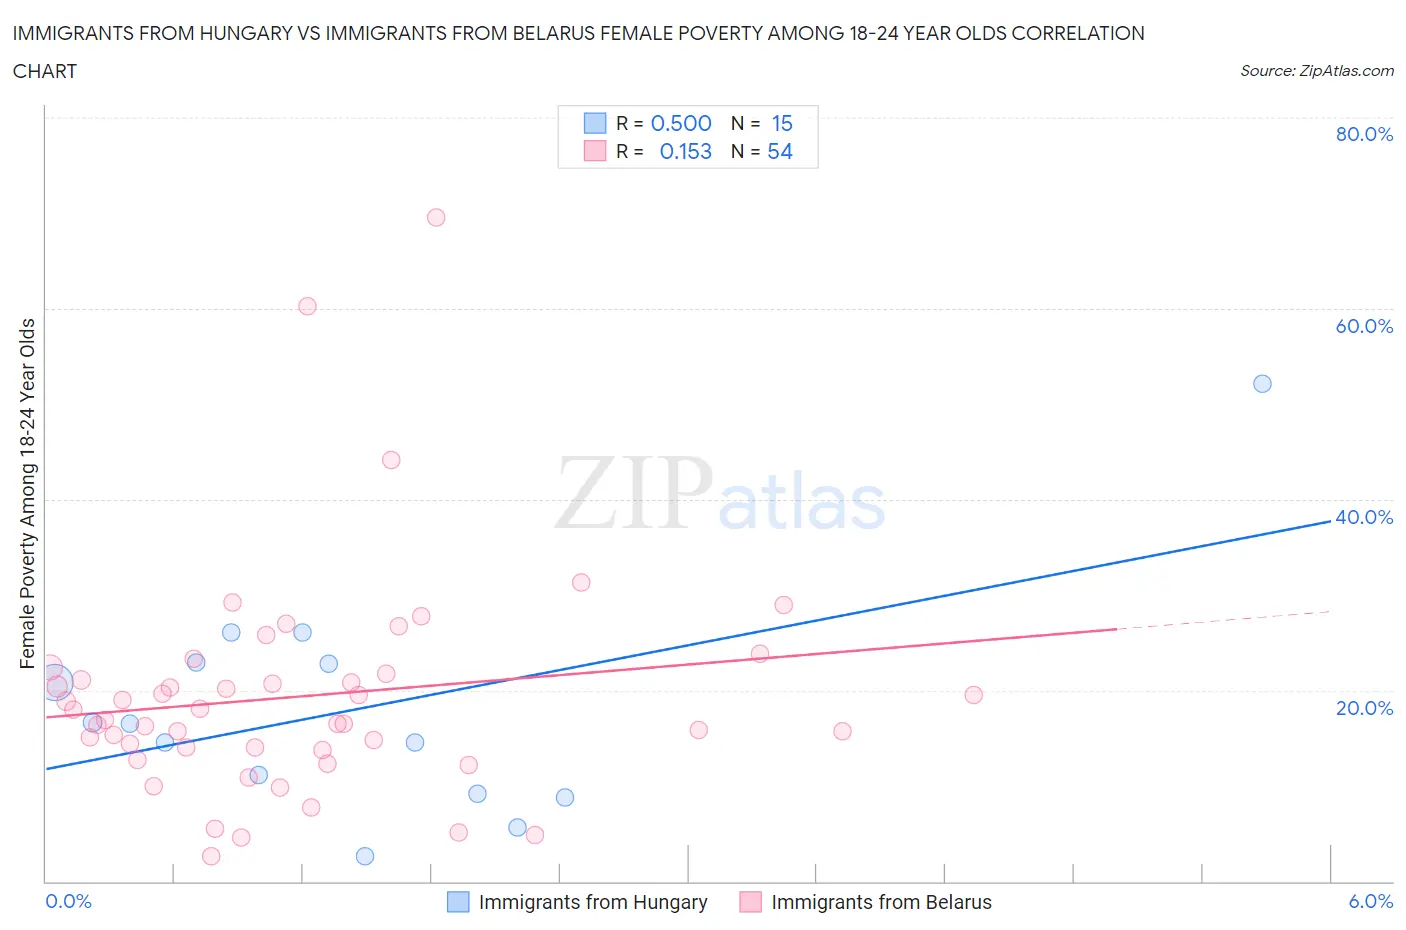 Immigrants from Hungary vs Immigrants from Belarus Female Poverty Among 18-24 Year Olds